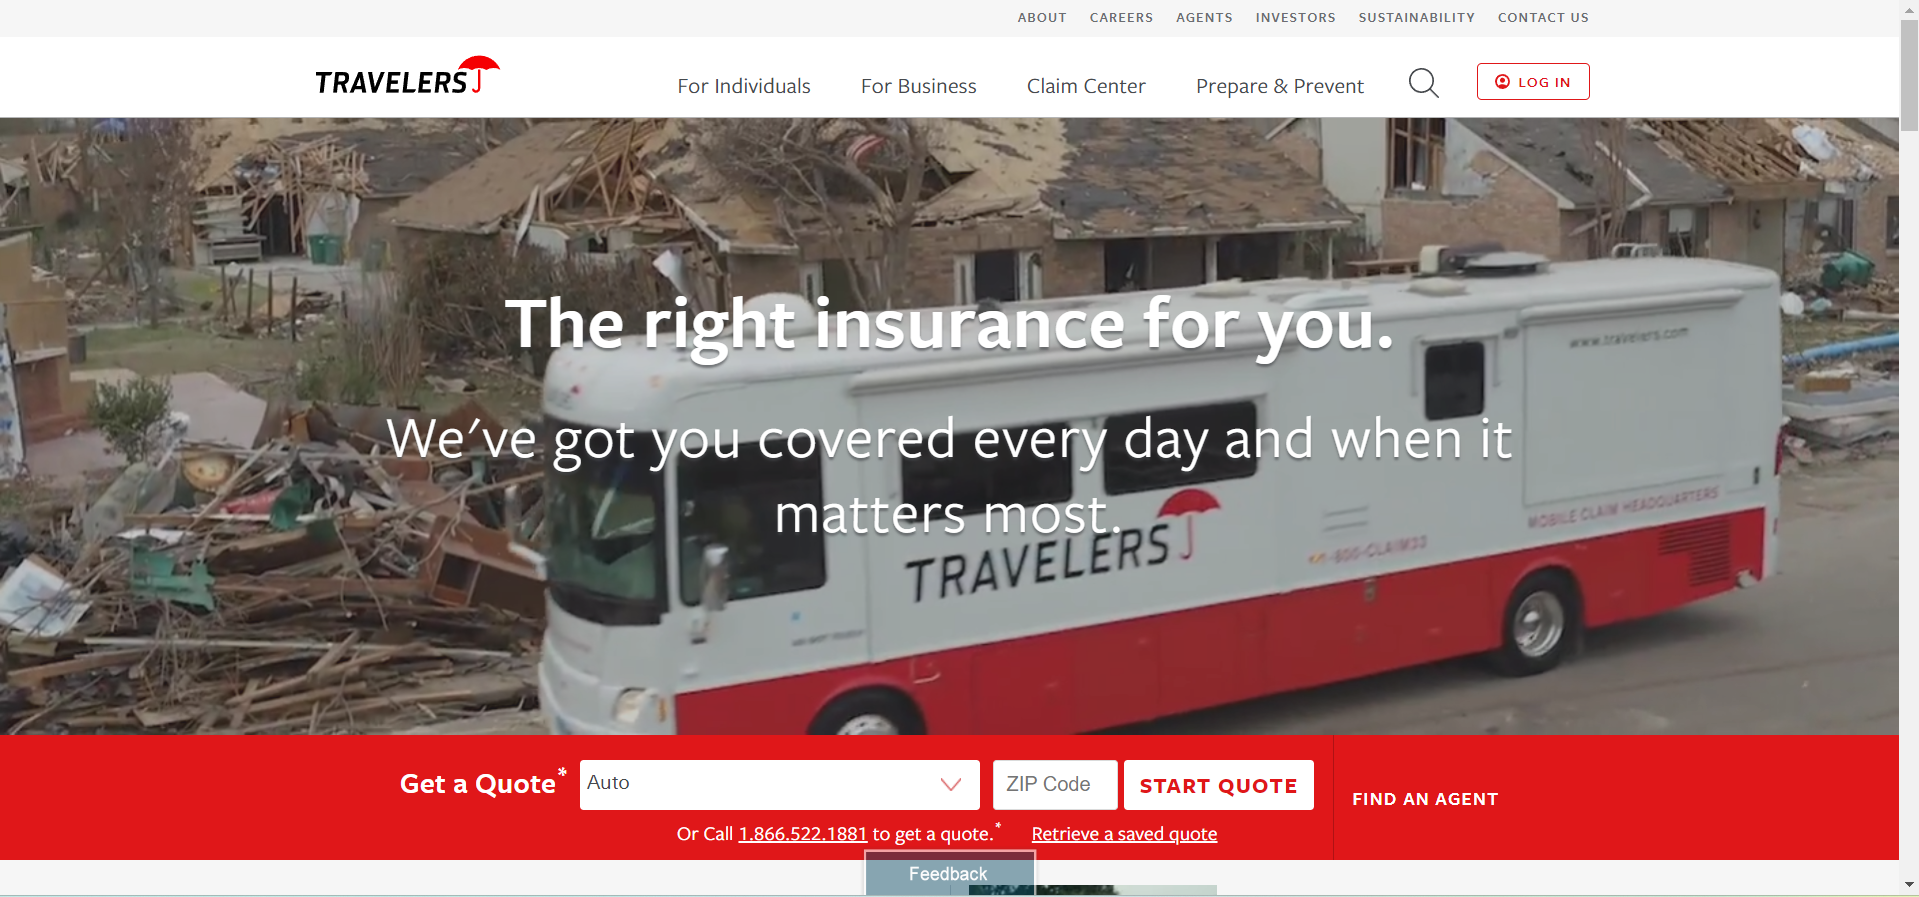 Travelers: Best Business Insurance for Property Management Services